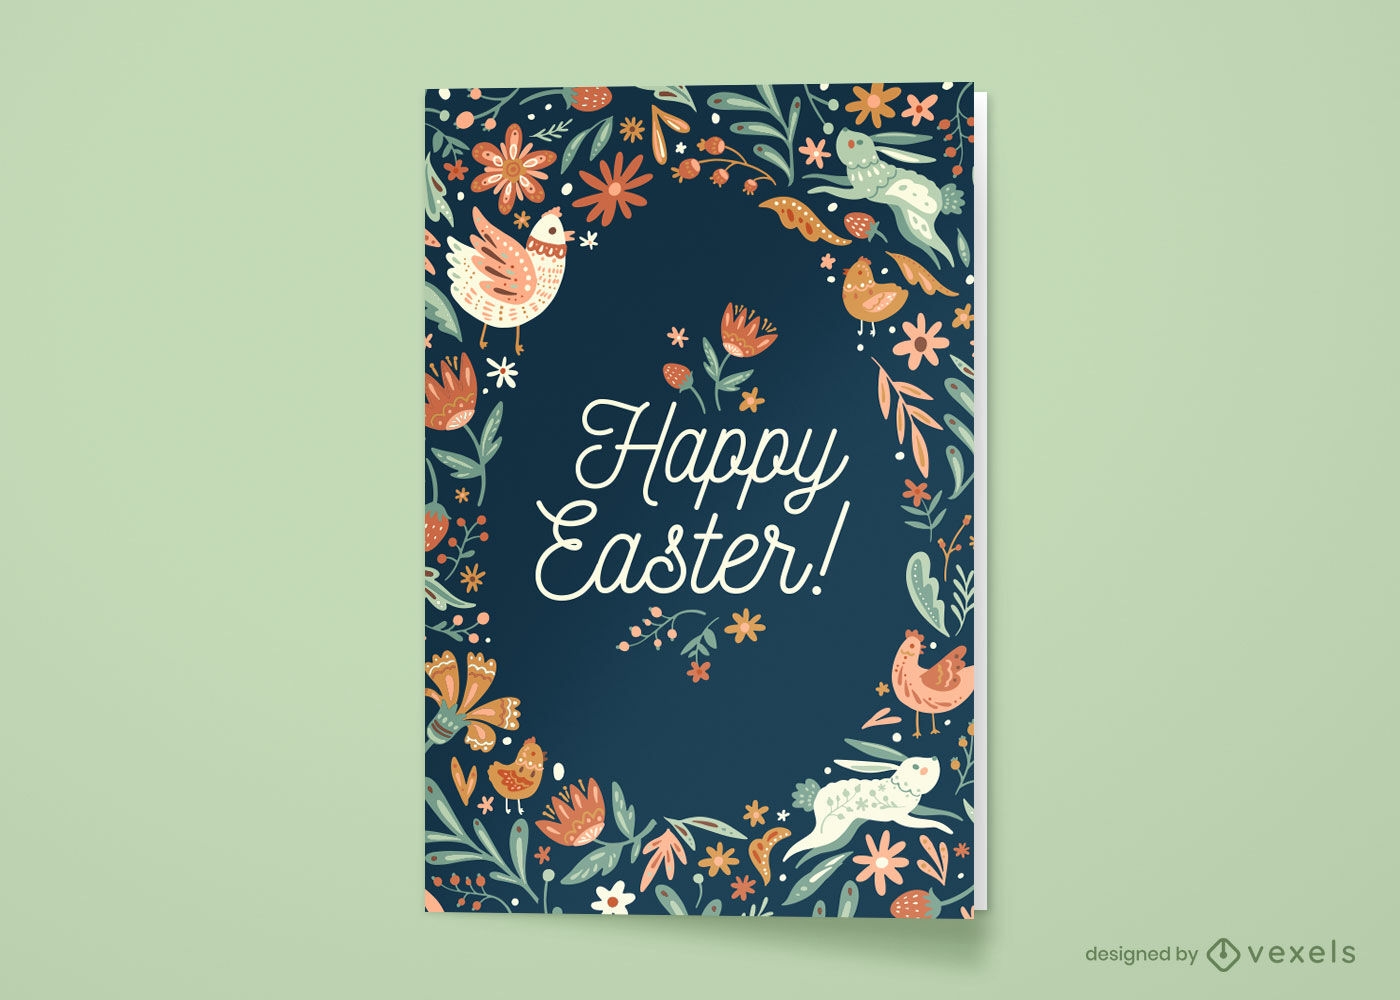 Happy Easter floral greeting card design